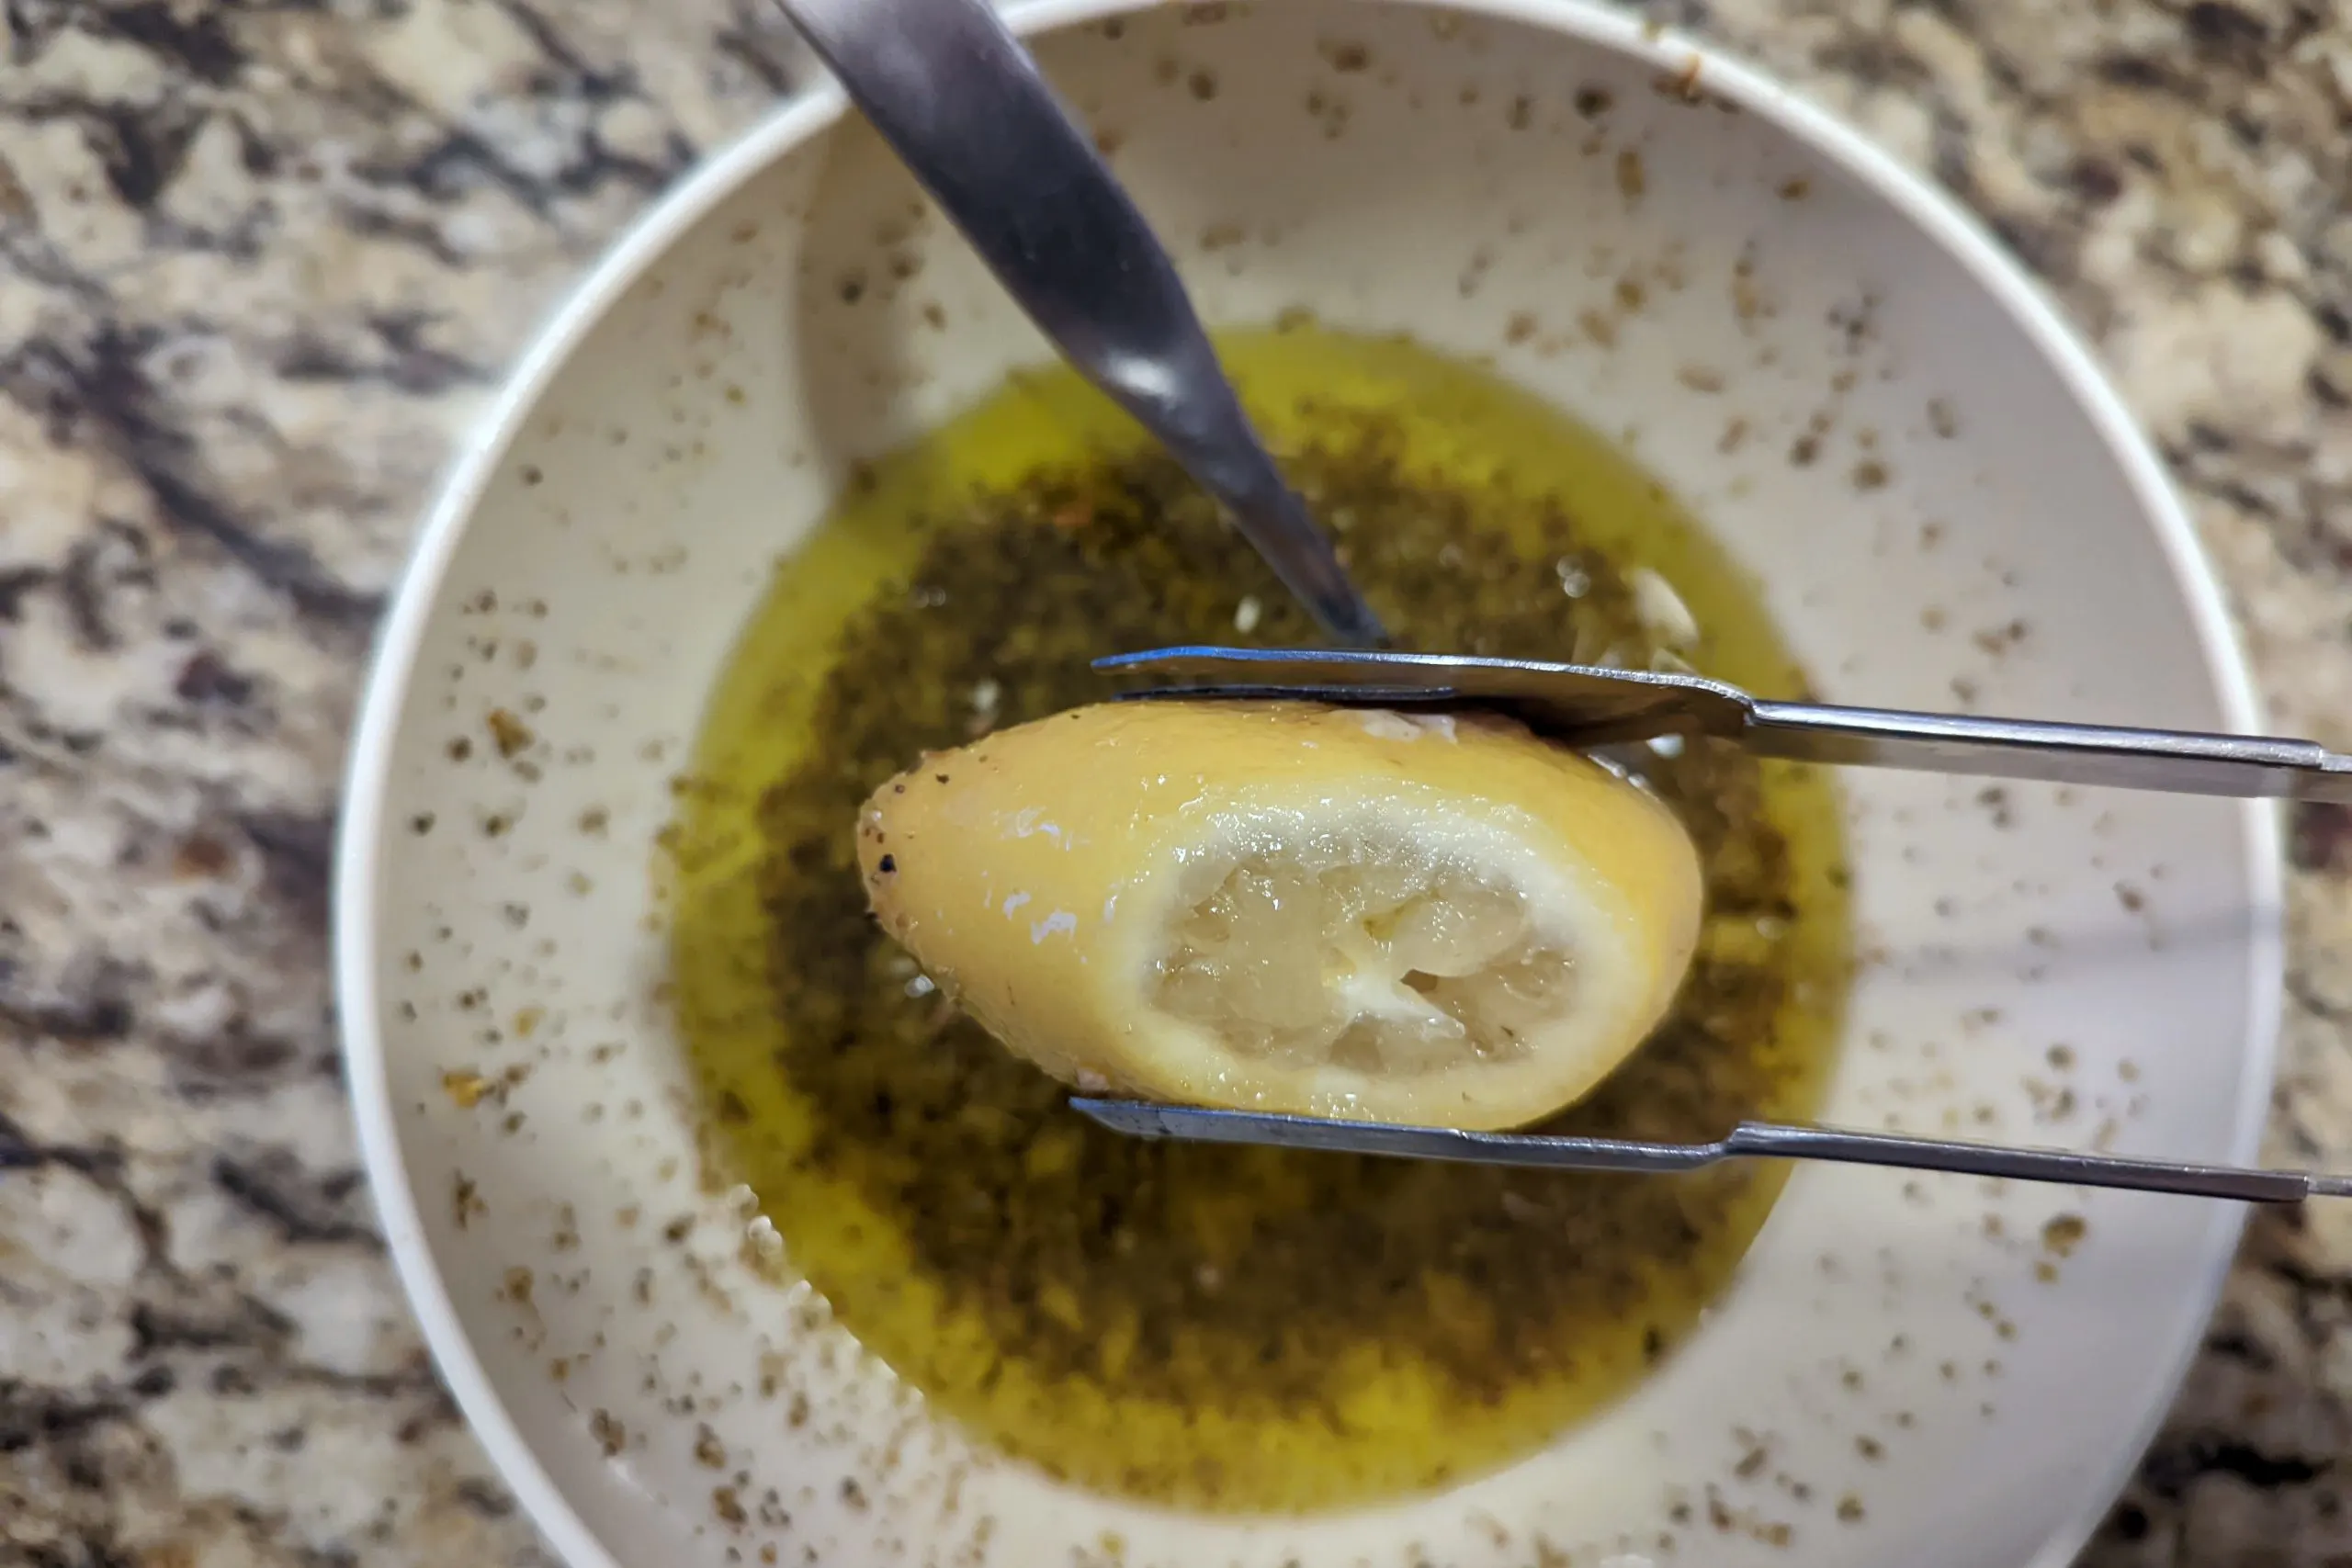 Remove the cooked lemons and squeeze it into the salmoriglio sauce.